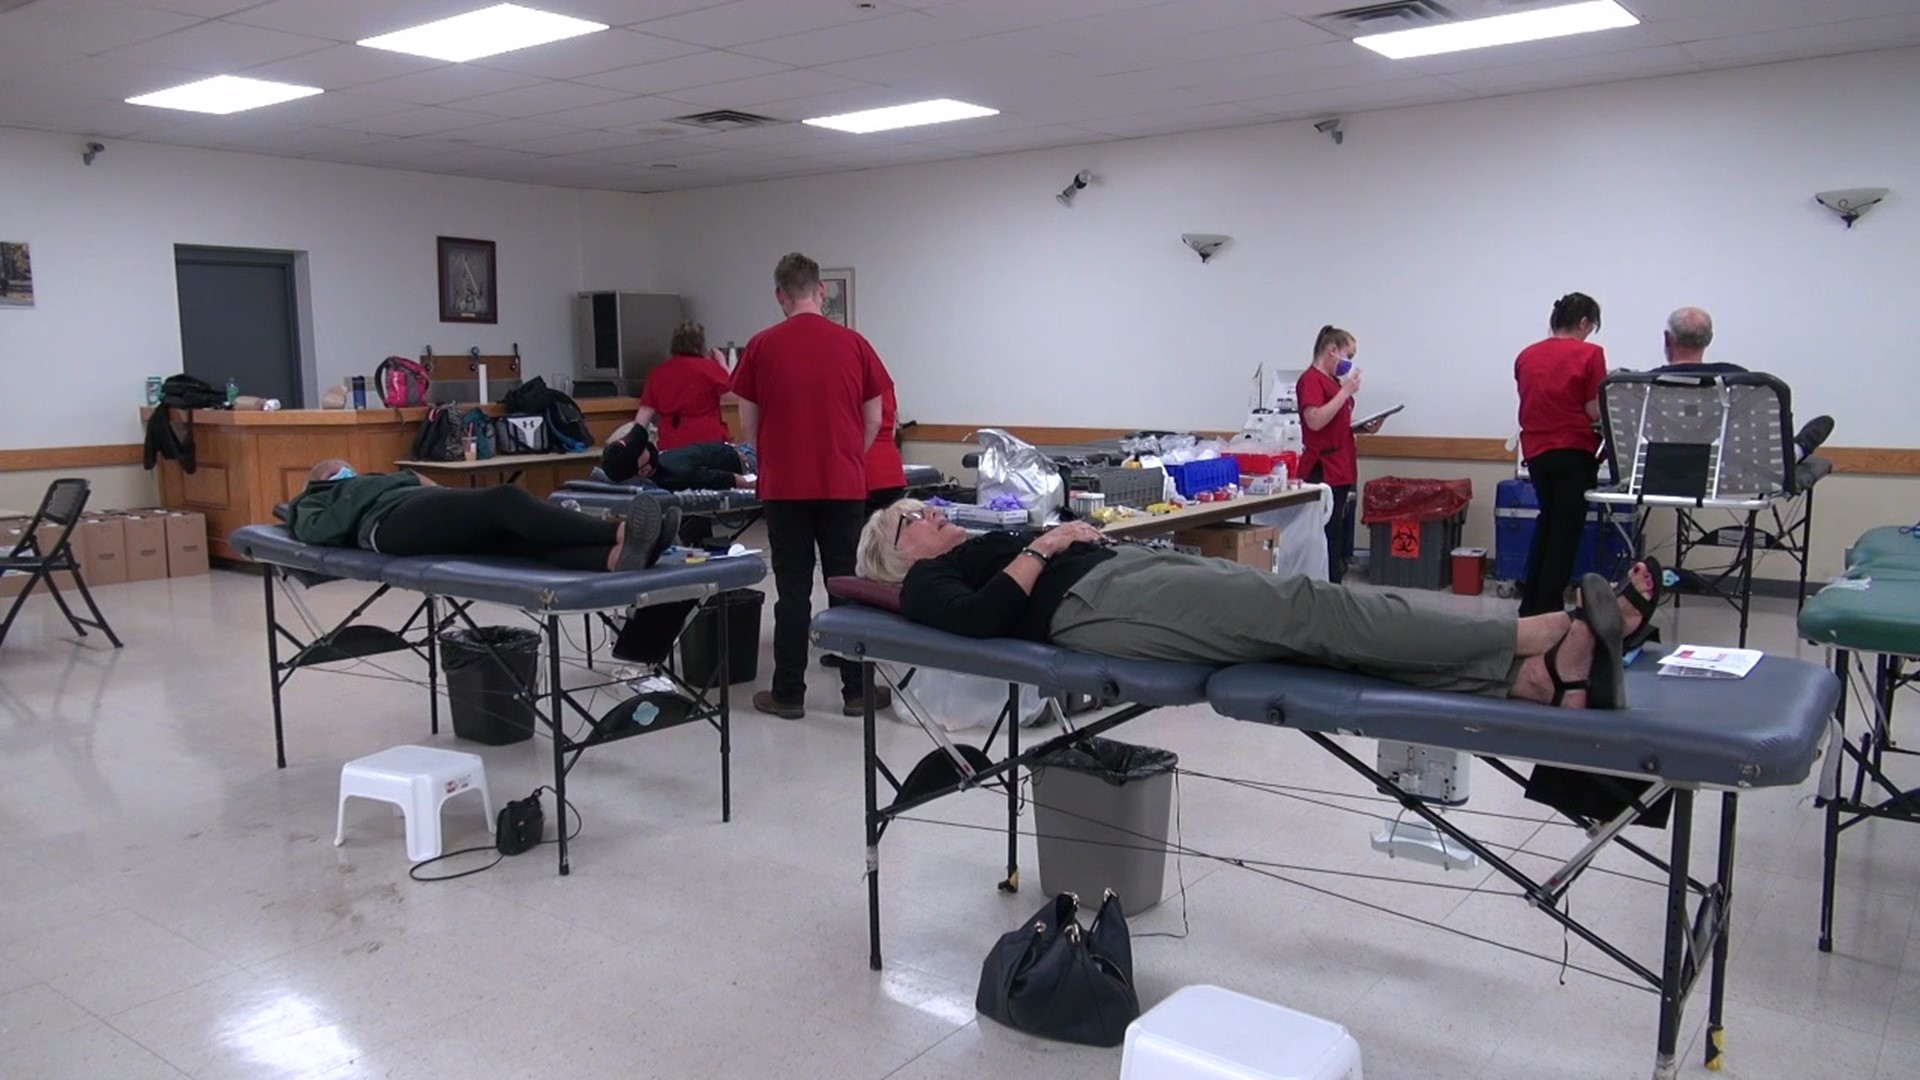 The American Red Cross is encouraging people to donate blood and that's exactly what people were doing in Tunkhannock to help fill the local blood supply.